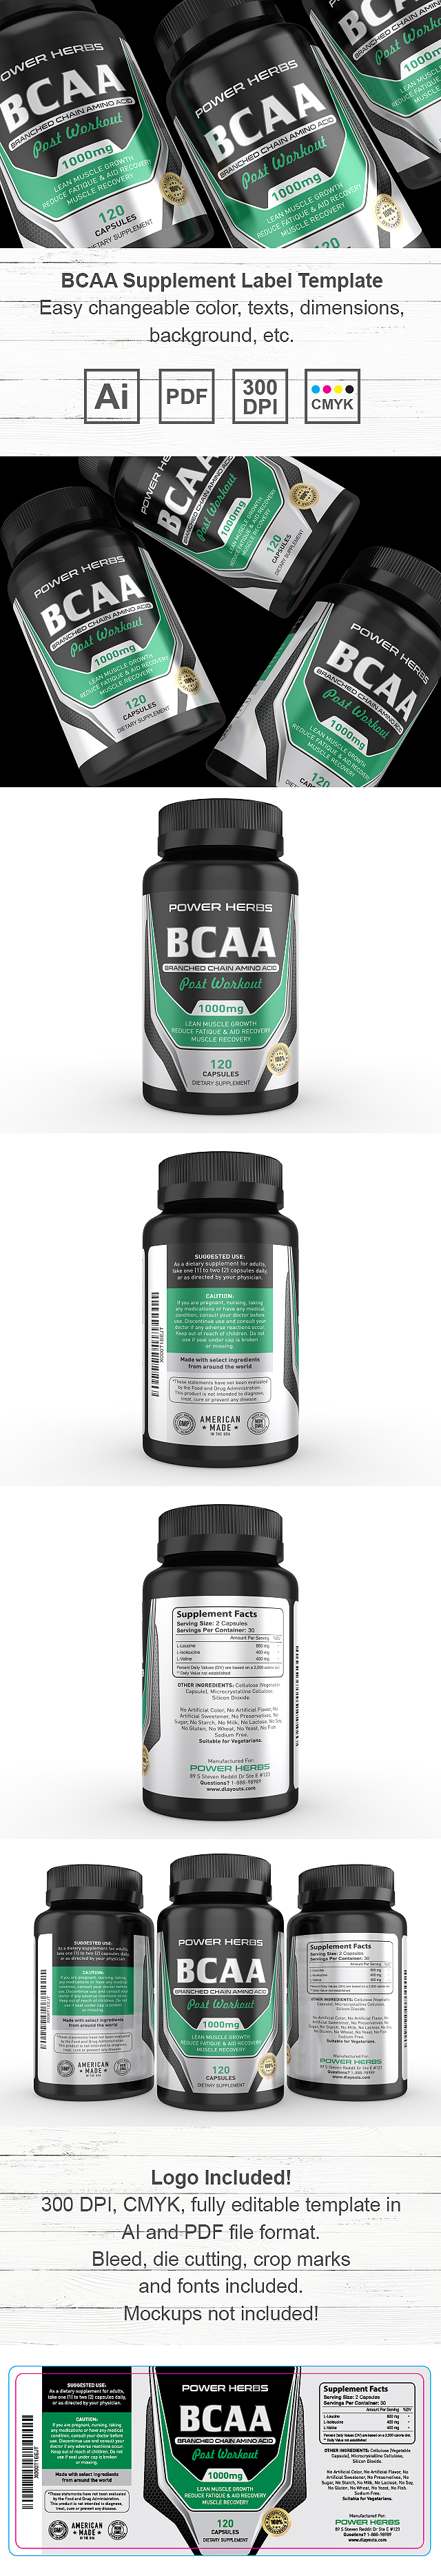 BCAA Amino Acids Supplement Label Template